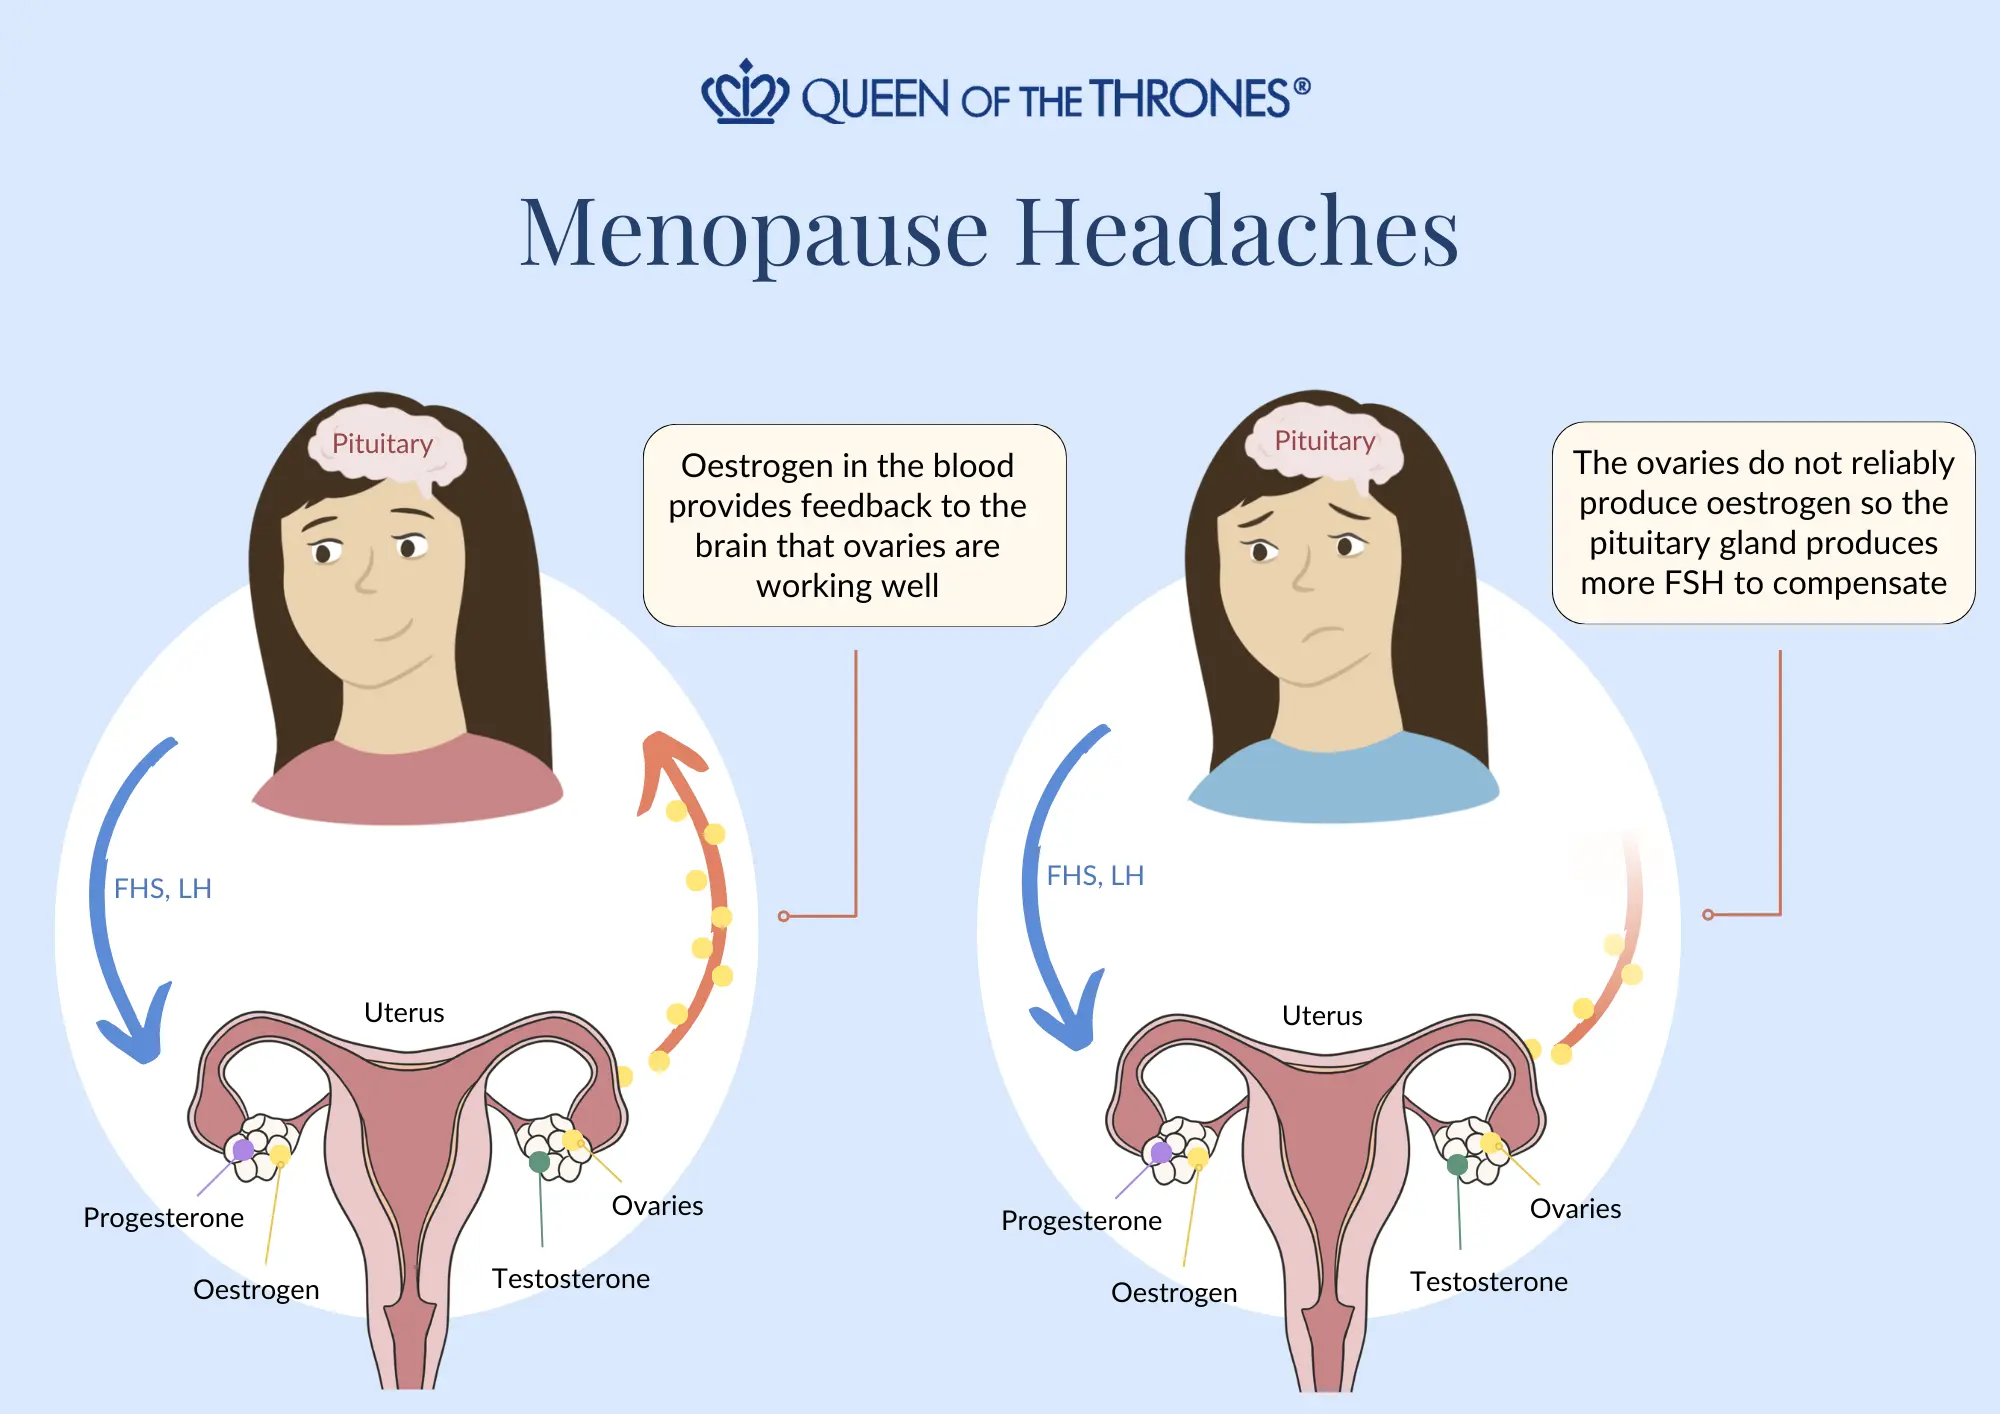 Menopause headaches by Queen of the Thrones 